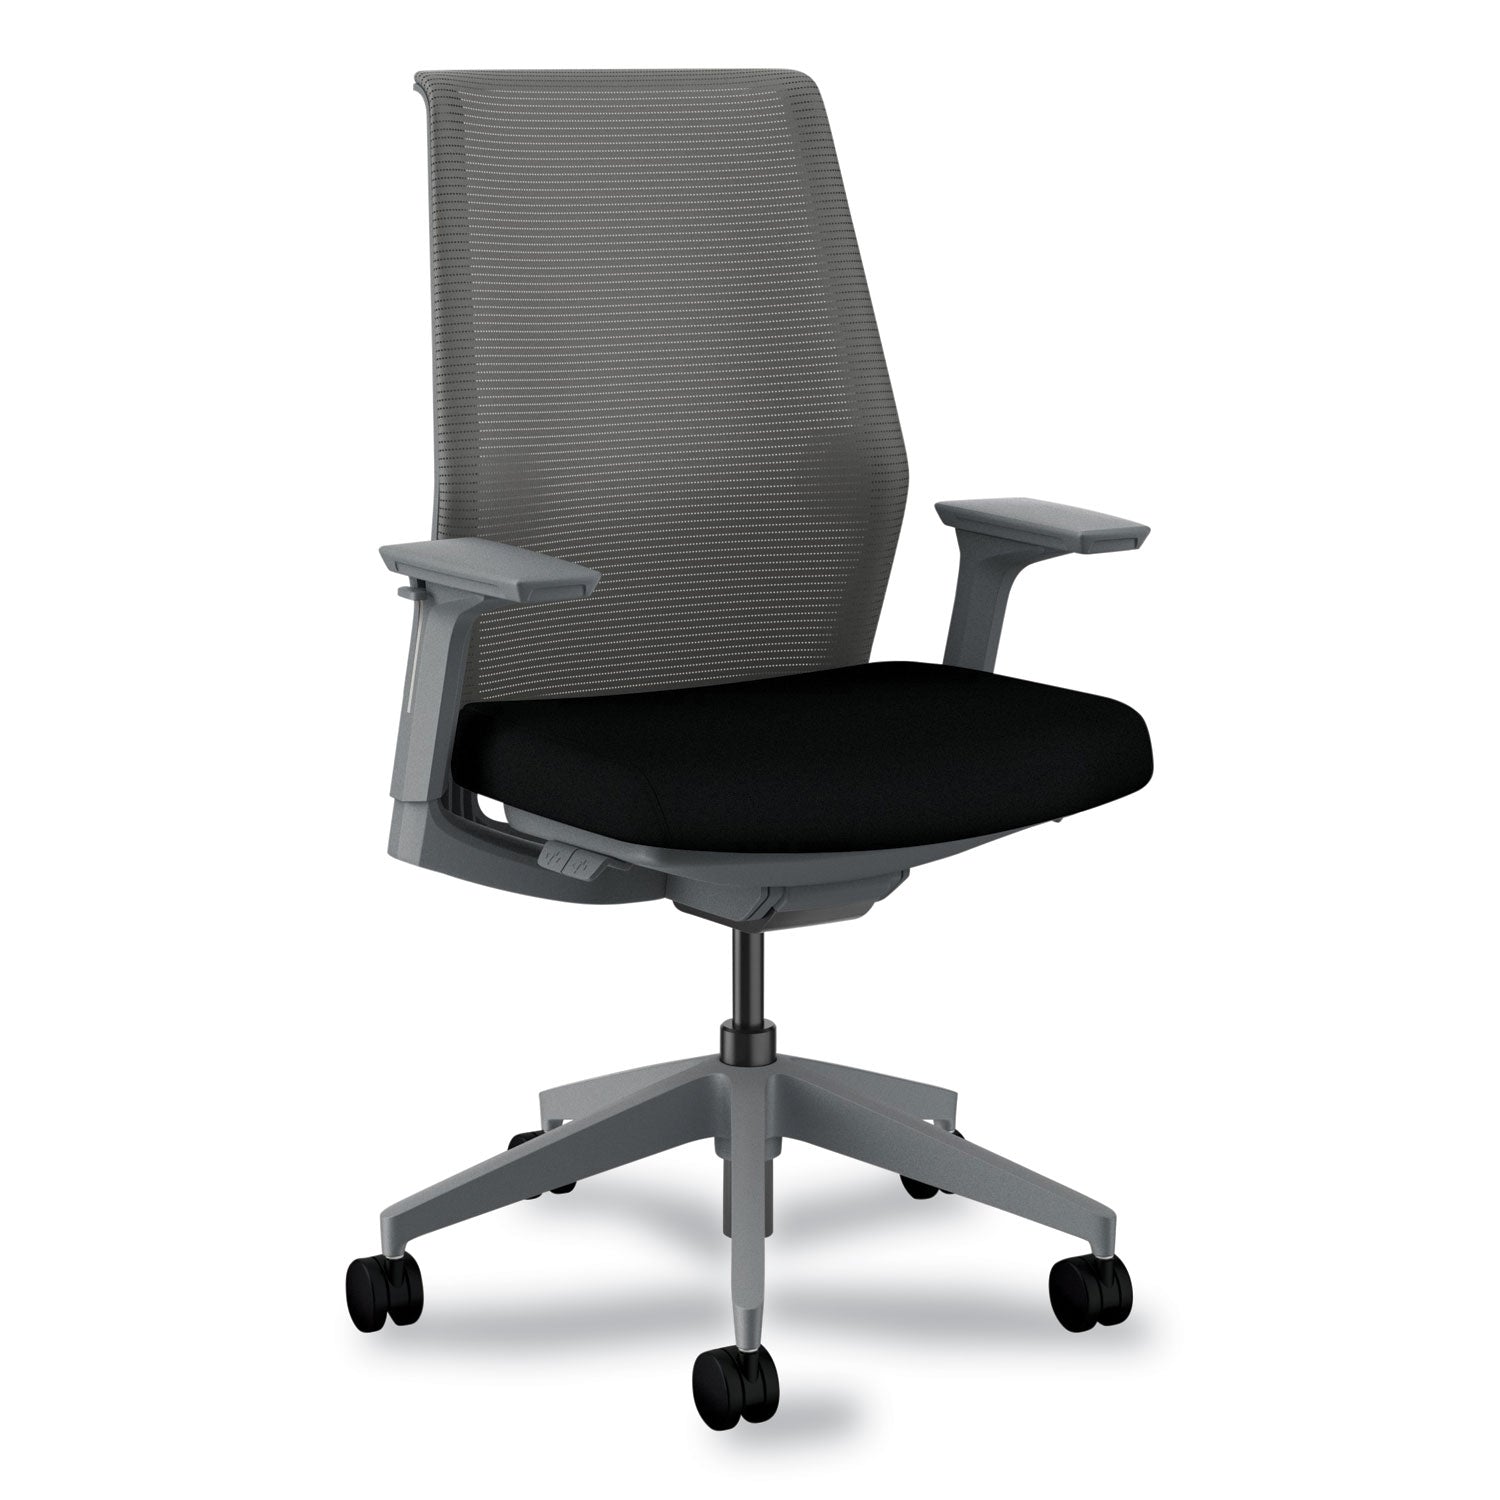 cipher-mesh-back-task-chair-supports-300-lb-15-to-20-seat-height-black-seat-charcoal-back-base-ships-in-7-10-bus-days_honcrthscc10lss - 1